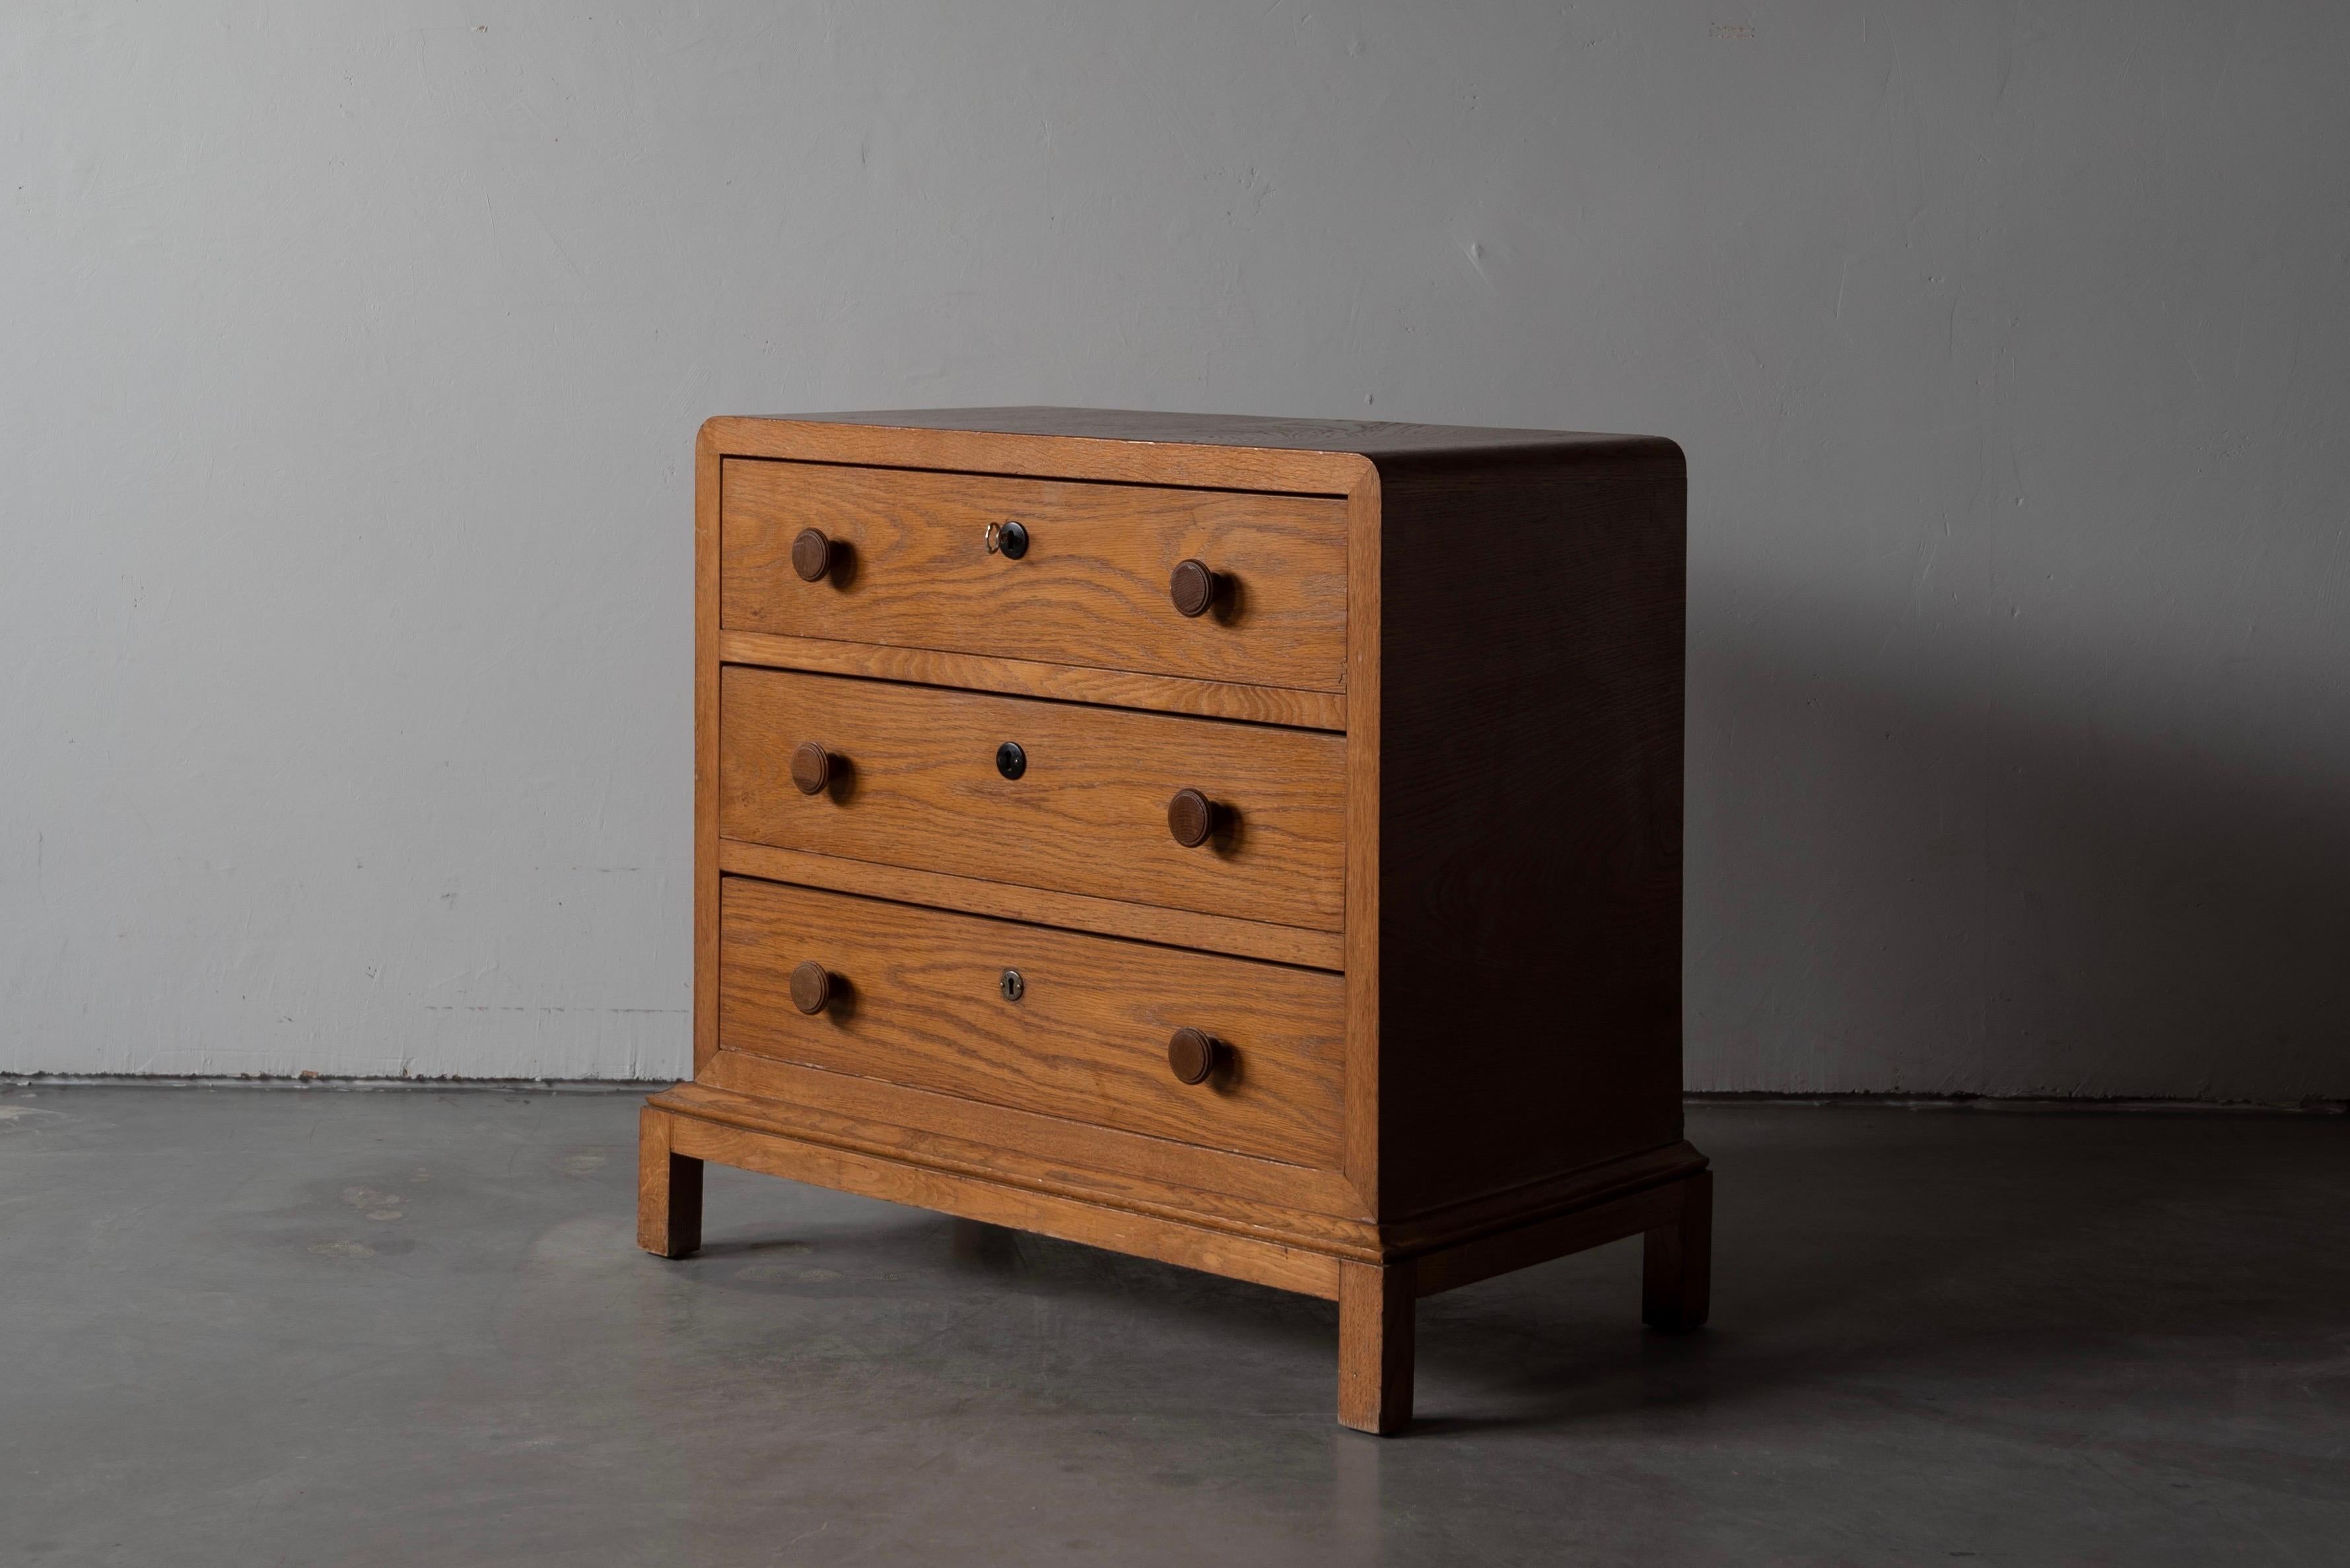 A dresser or chest of drawers in solid oak. Designed and produced in Sweden, 1940s. With original key included.

In simple and pure modern form, highlighting the wood grain. Work presents with beautiful original patina.

Other designers of the